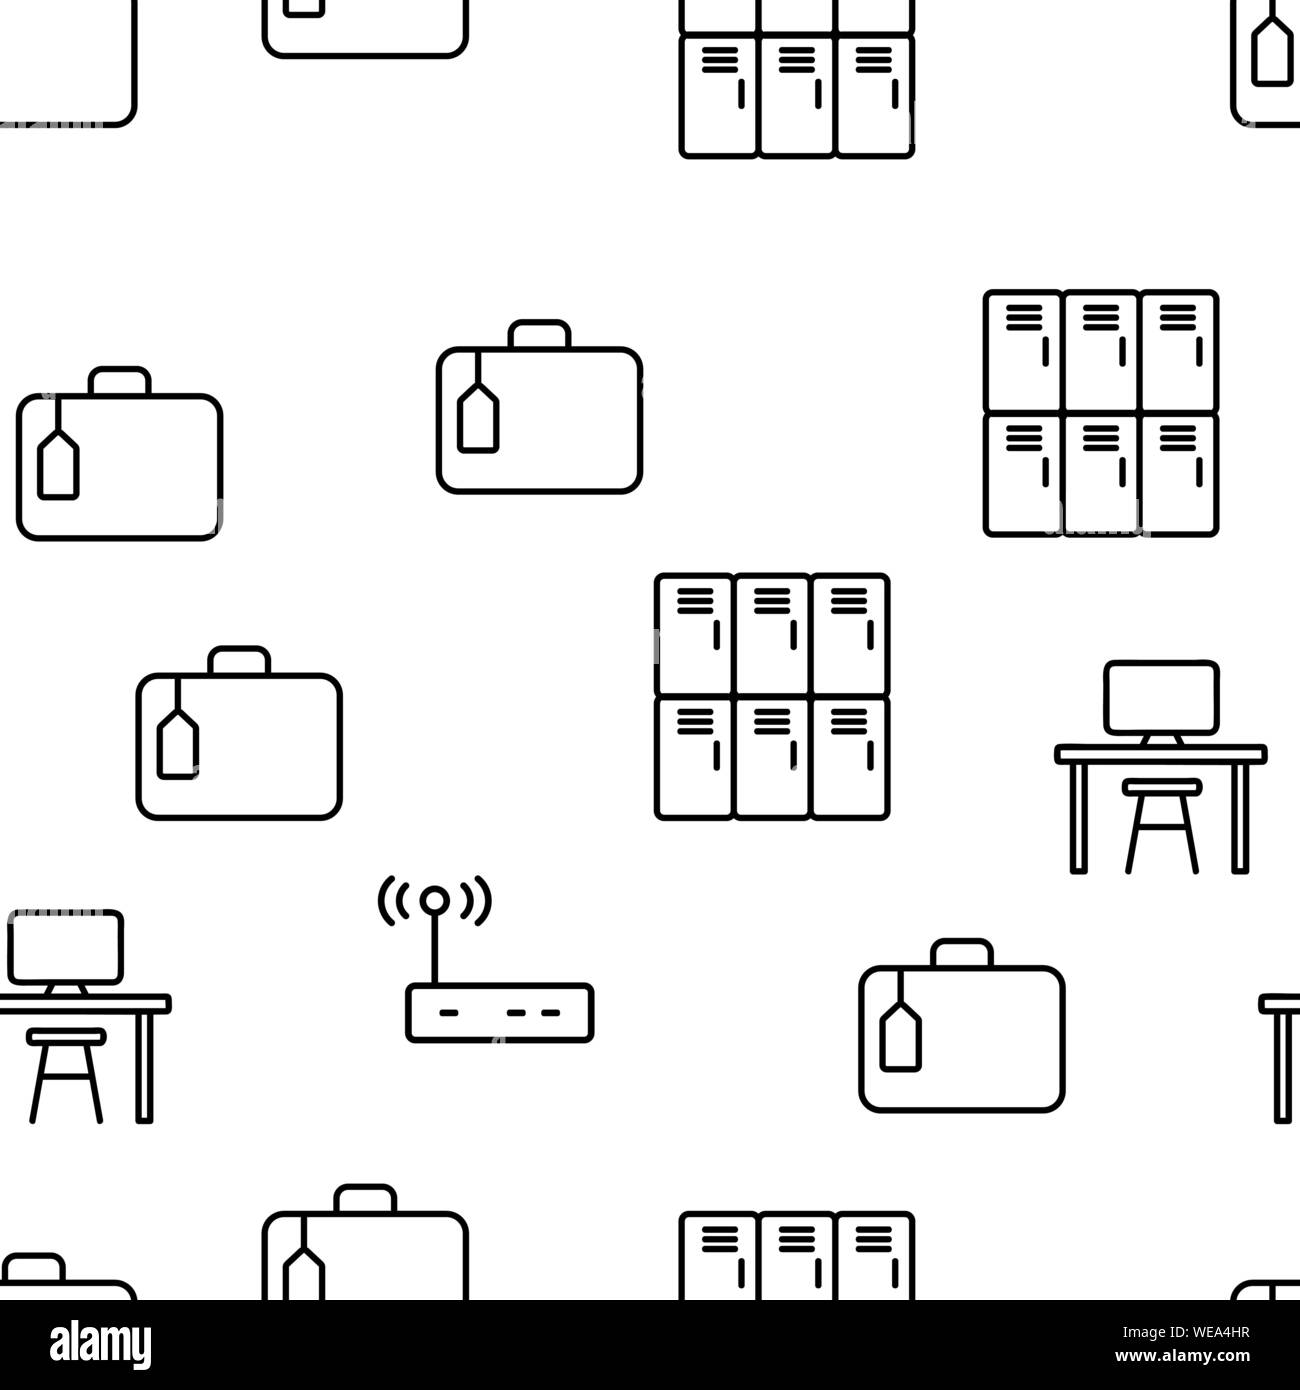 Hostel, Tourist Accommodation Vector Linear Icons Set Stock Vector